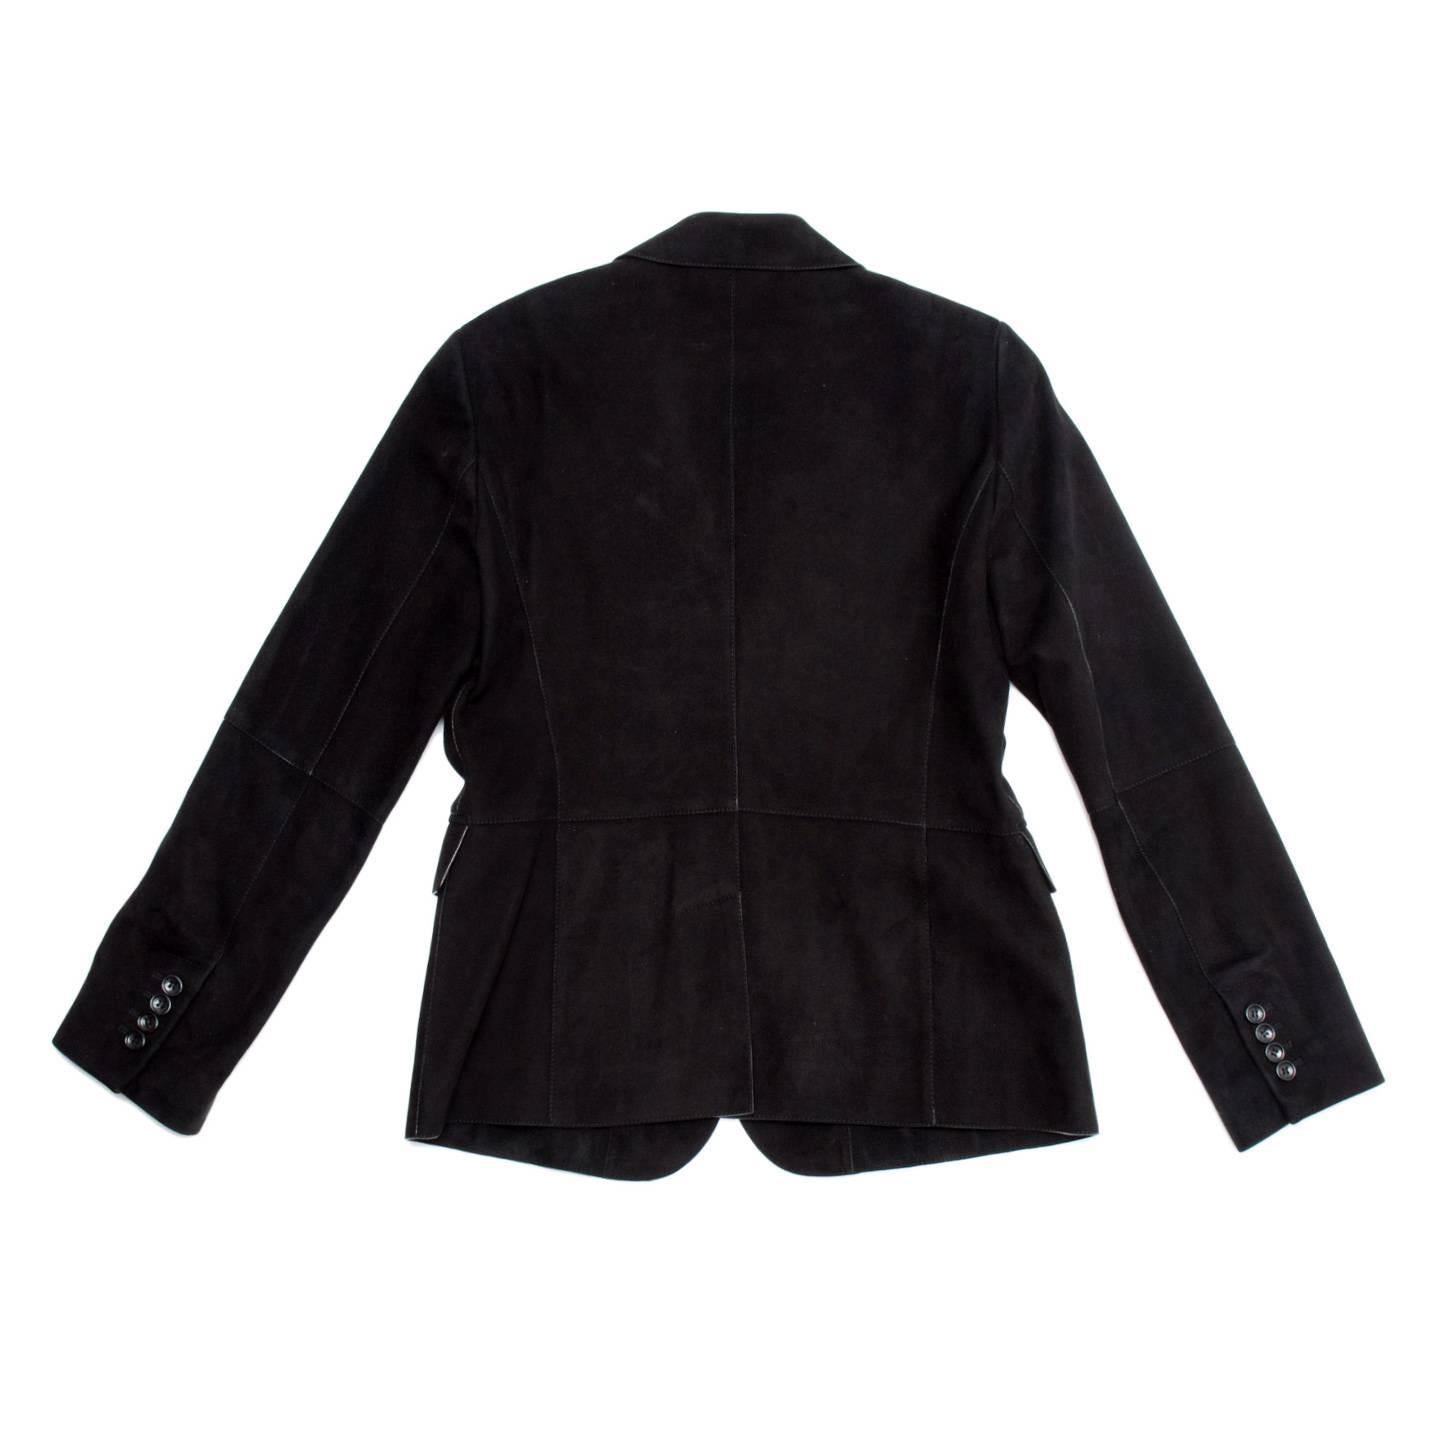 Loewe Black Suede Blazer In Excellent Condition For Sale In Brooklyn, NY